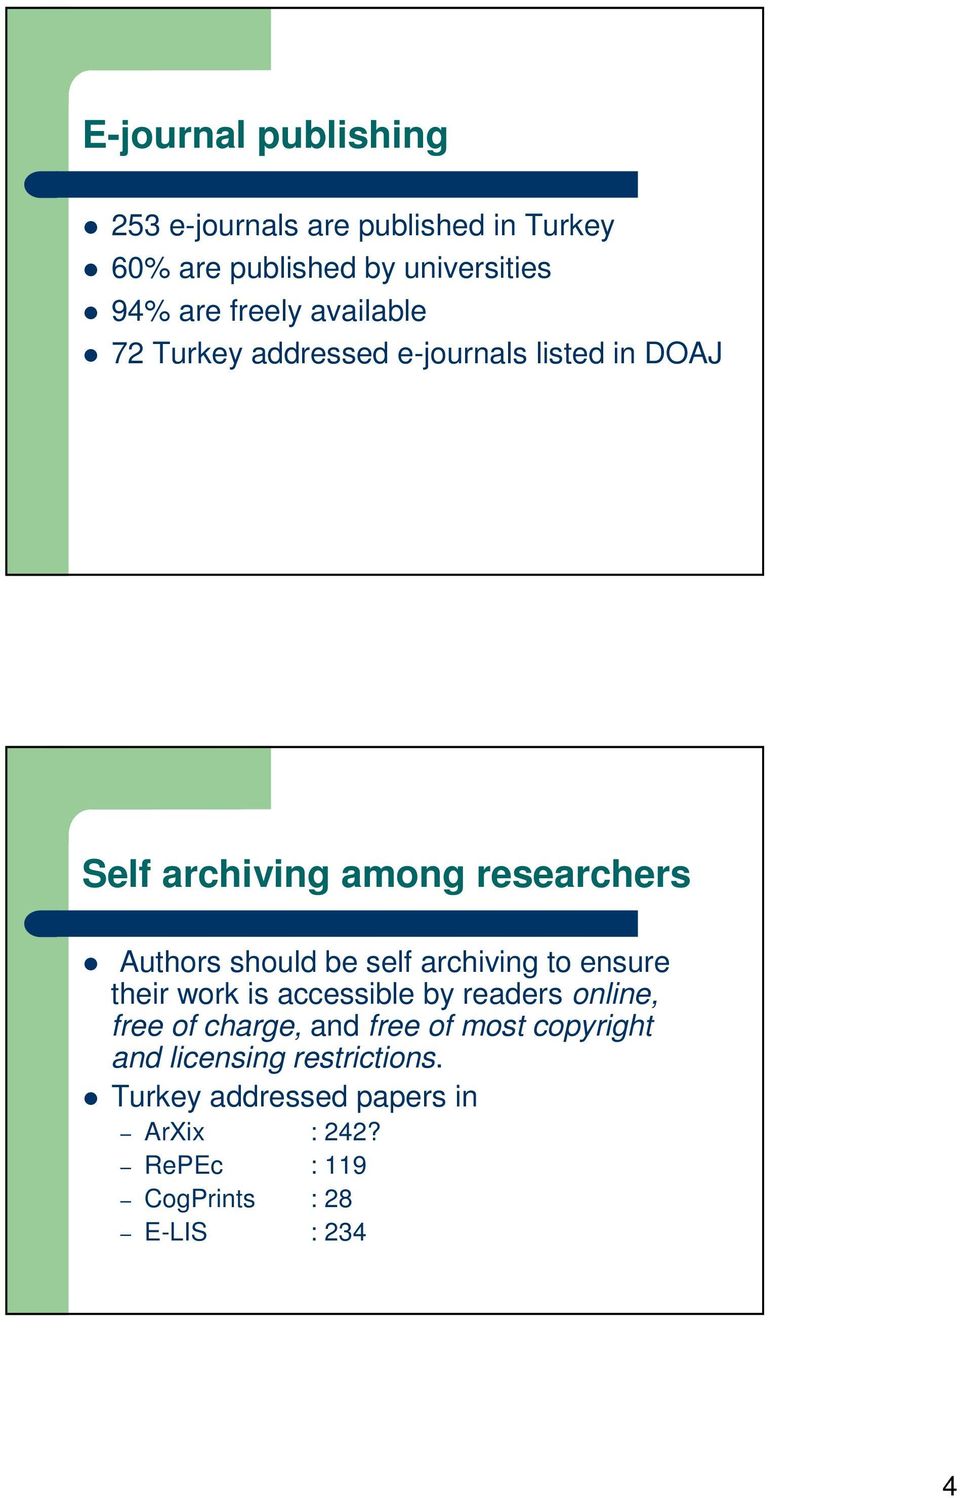 self archiving to ensure their work is accessible by readers online, free of charge, and free of most